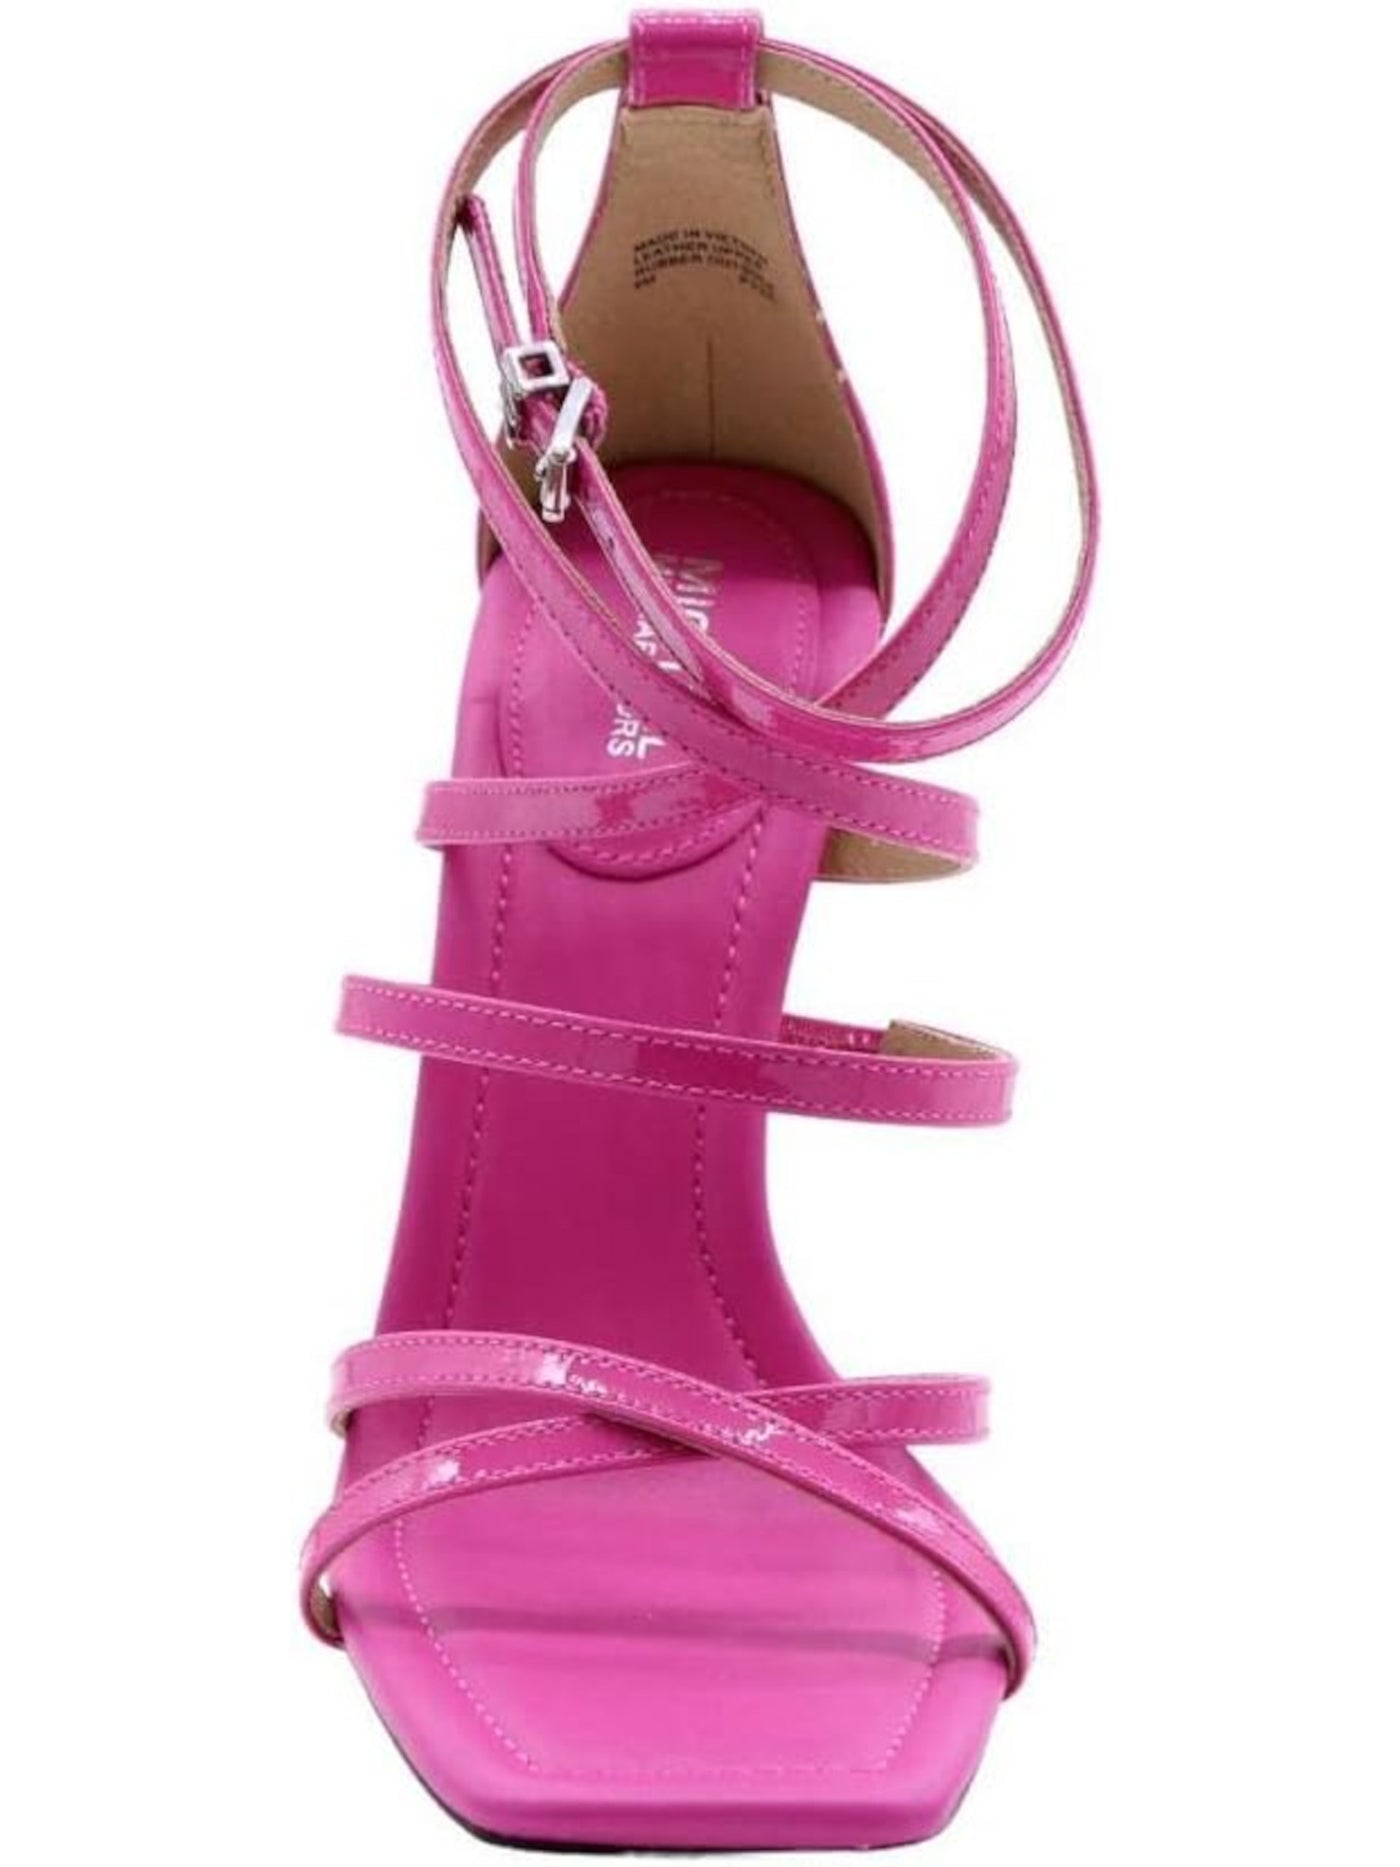 MICHAEL MICHAEL KORS Womens Pink Padded Strappy Imani Square Toe Sculpted Heel Buckle Leather Dress Heeled Sandal 8.5 M